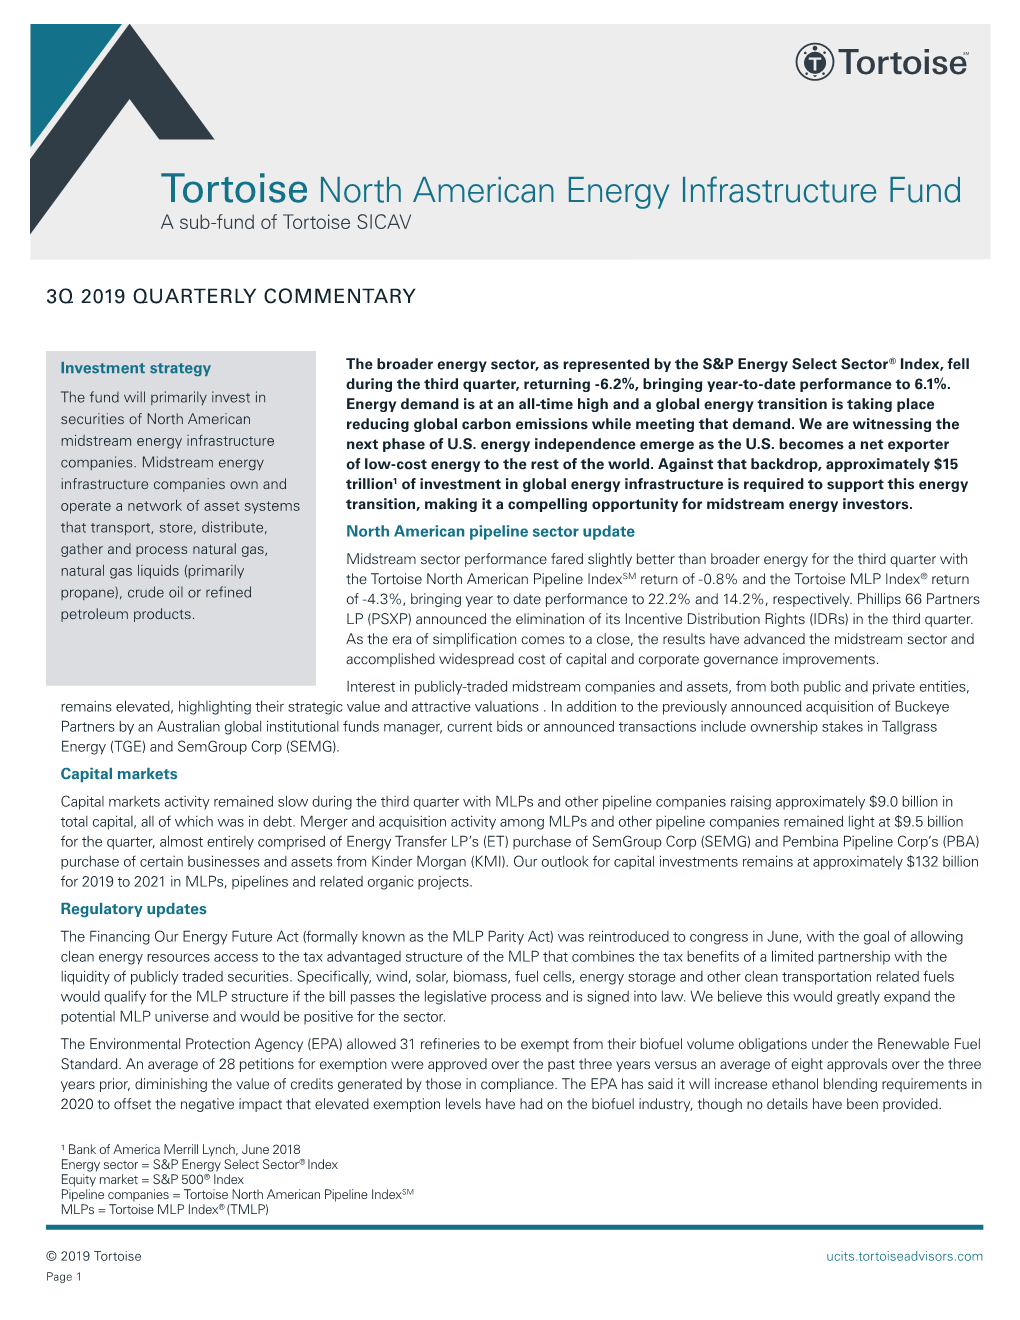 Tortoise North American Energy Infrastructure Fund a Sub-Fund of Tortoise SICAV